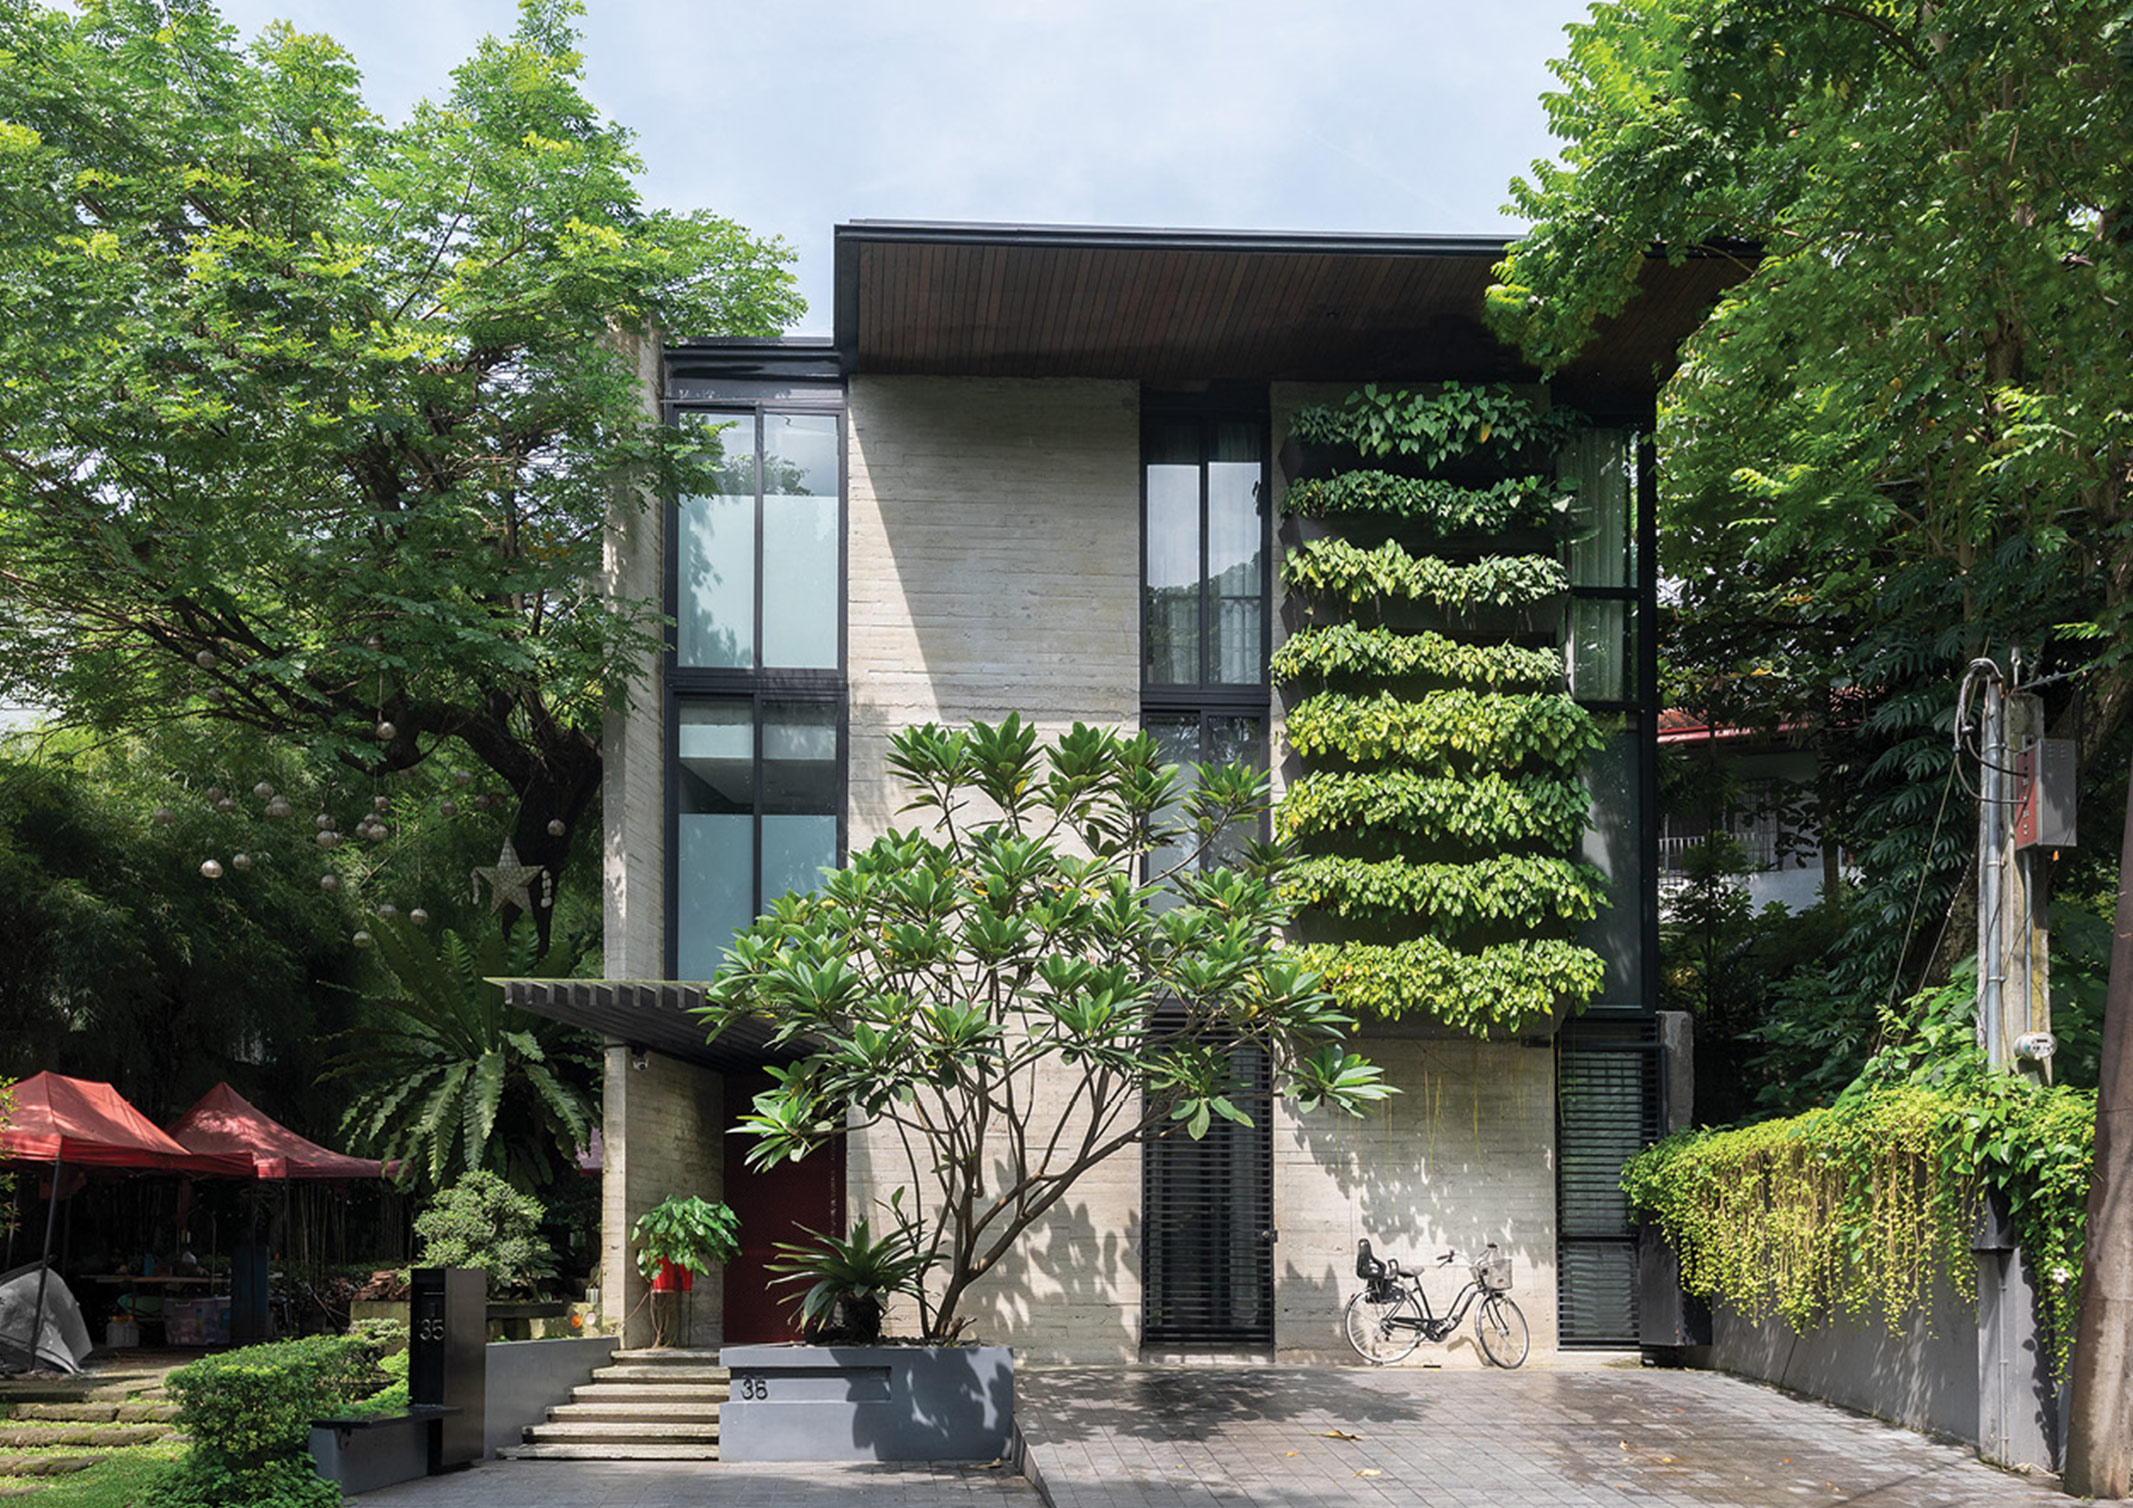 A narrow two storey concrete home with green wall designed by Sudar Khadka.